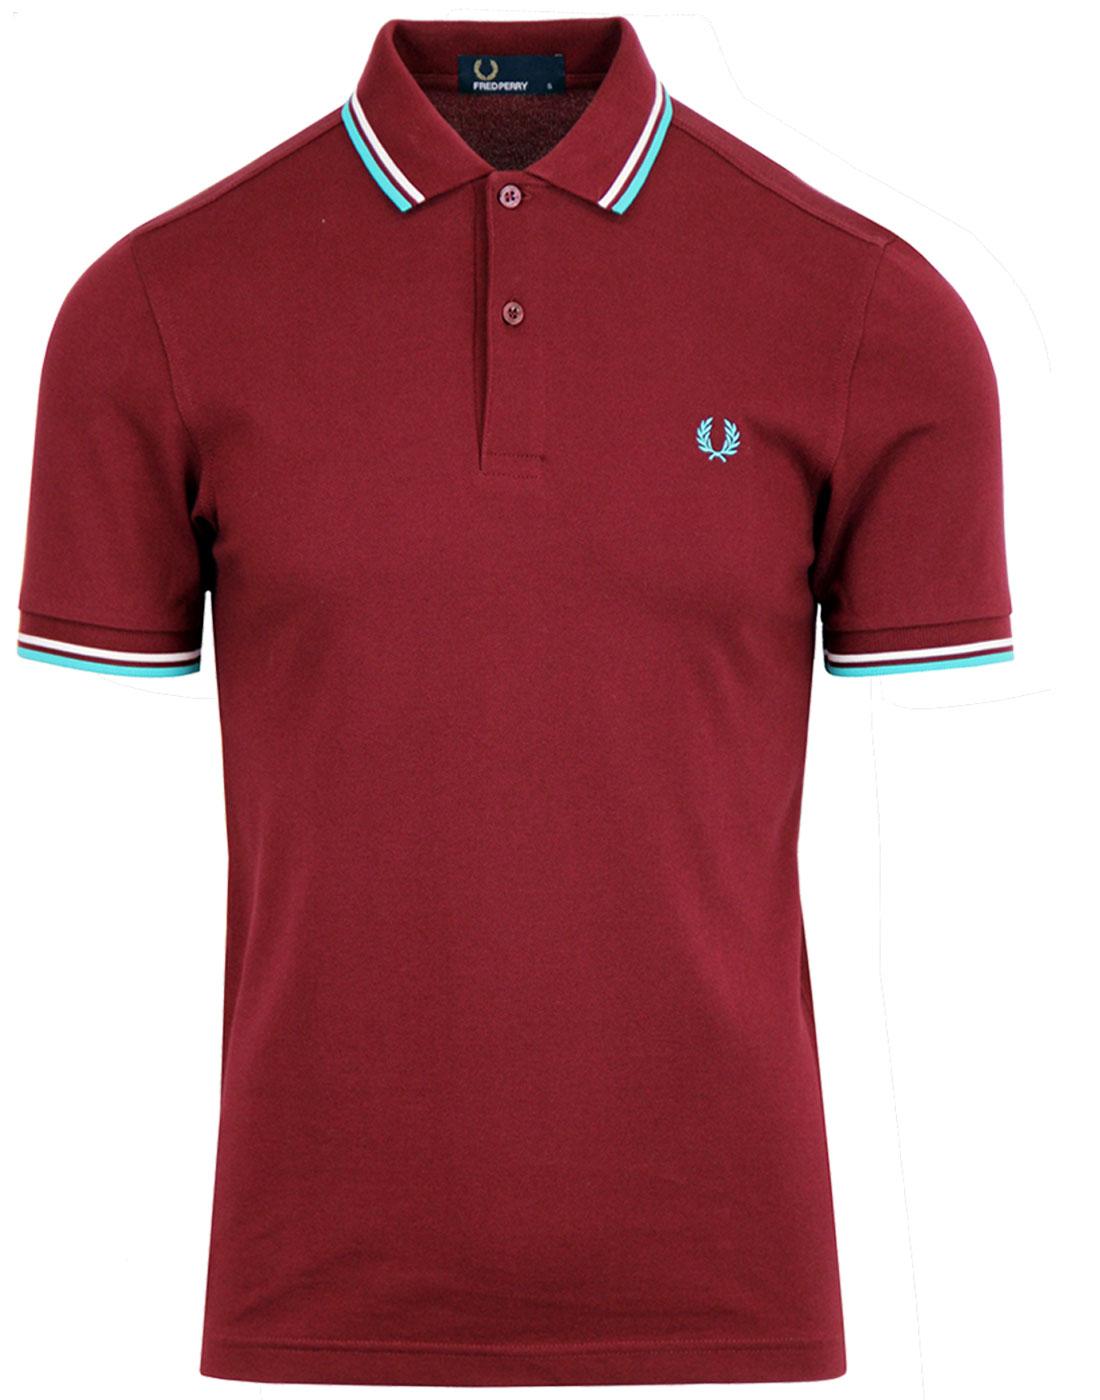 FRED PERRY M3600 Mod Twin Tipped Polo Shirt - PORT